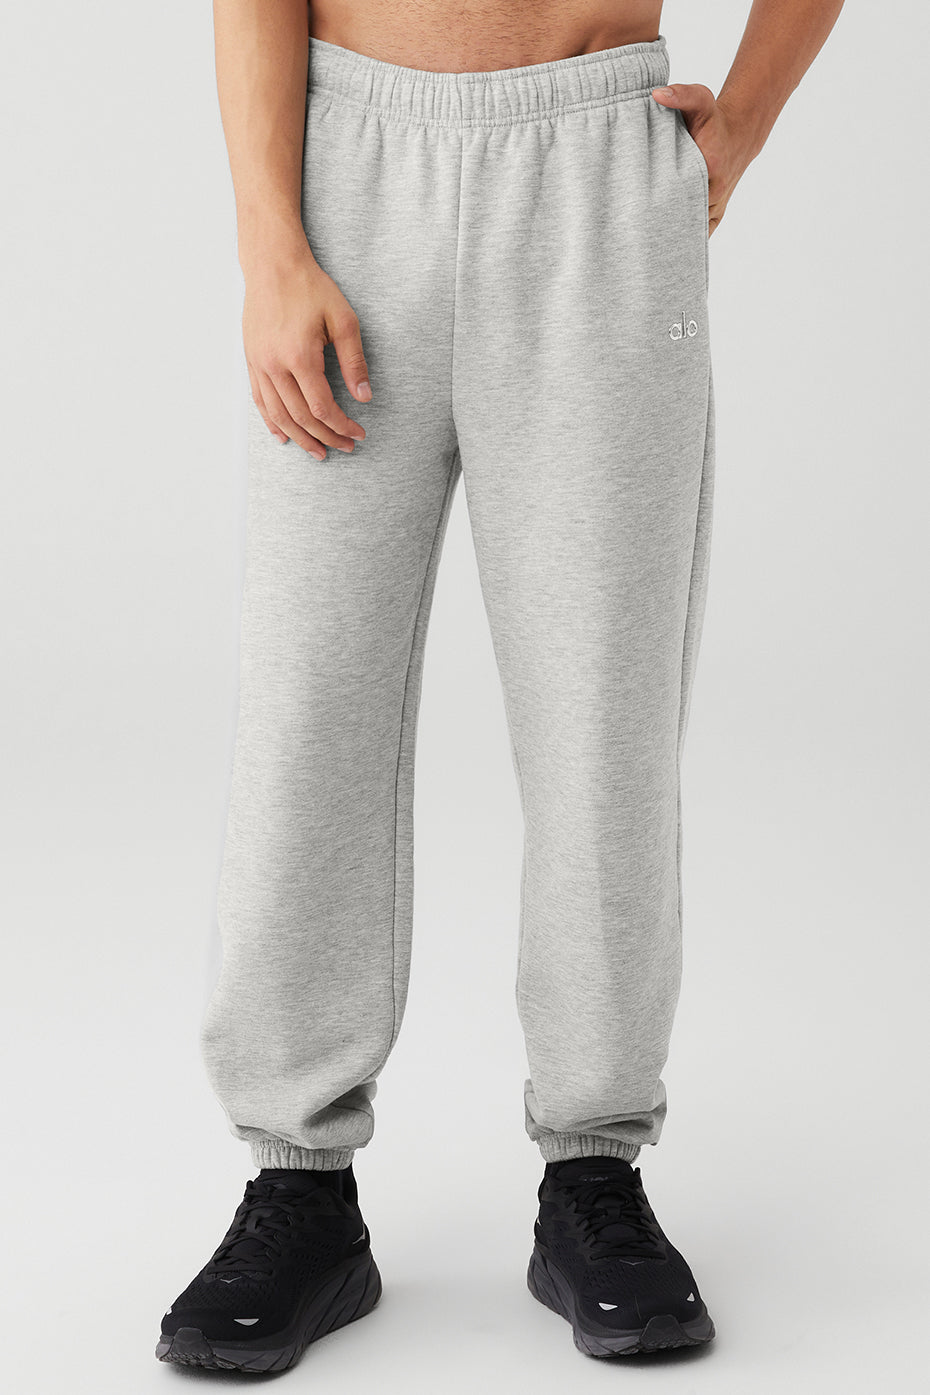 Accolade Sweatpant in Steel Blue by Alo Yoga - Work Well Daily